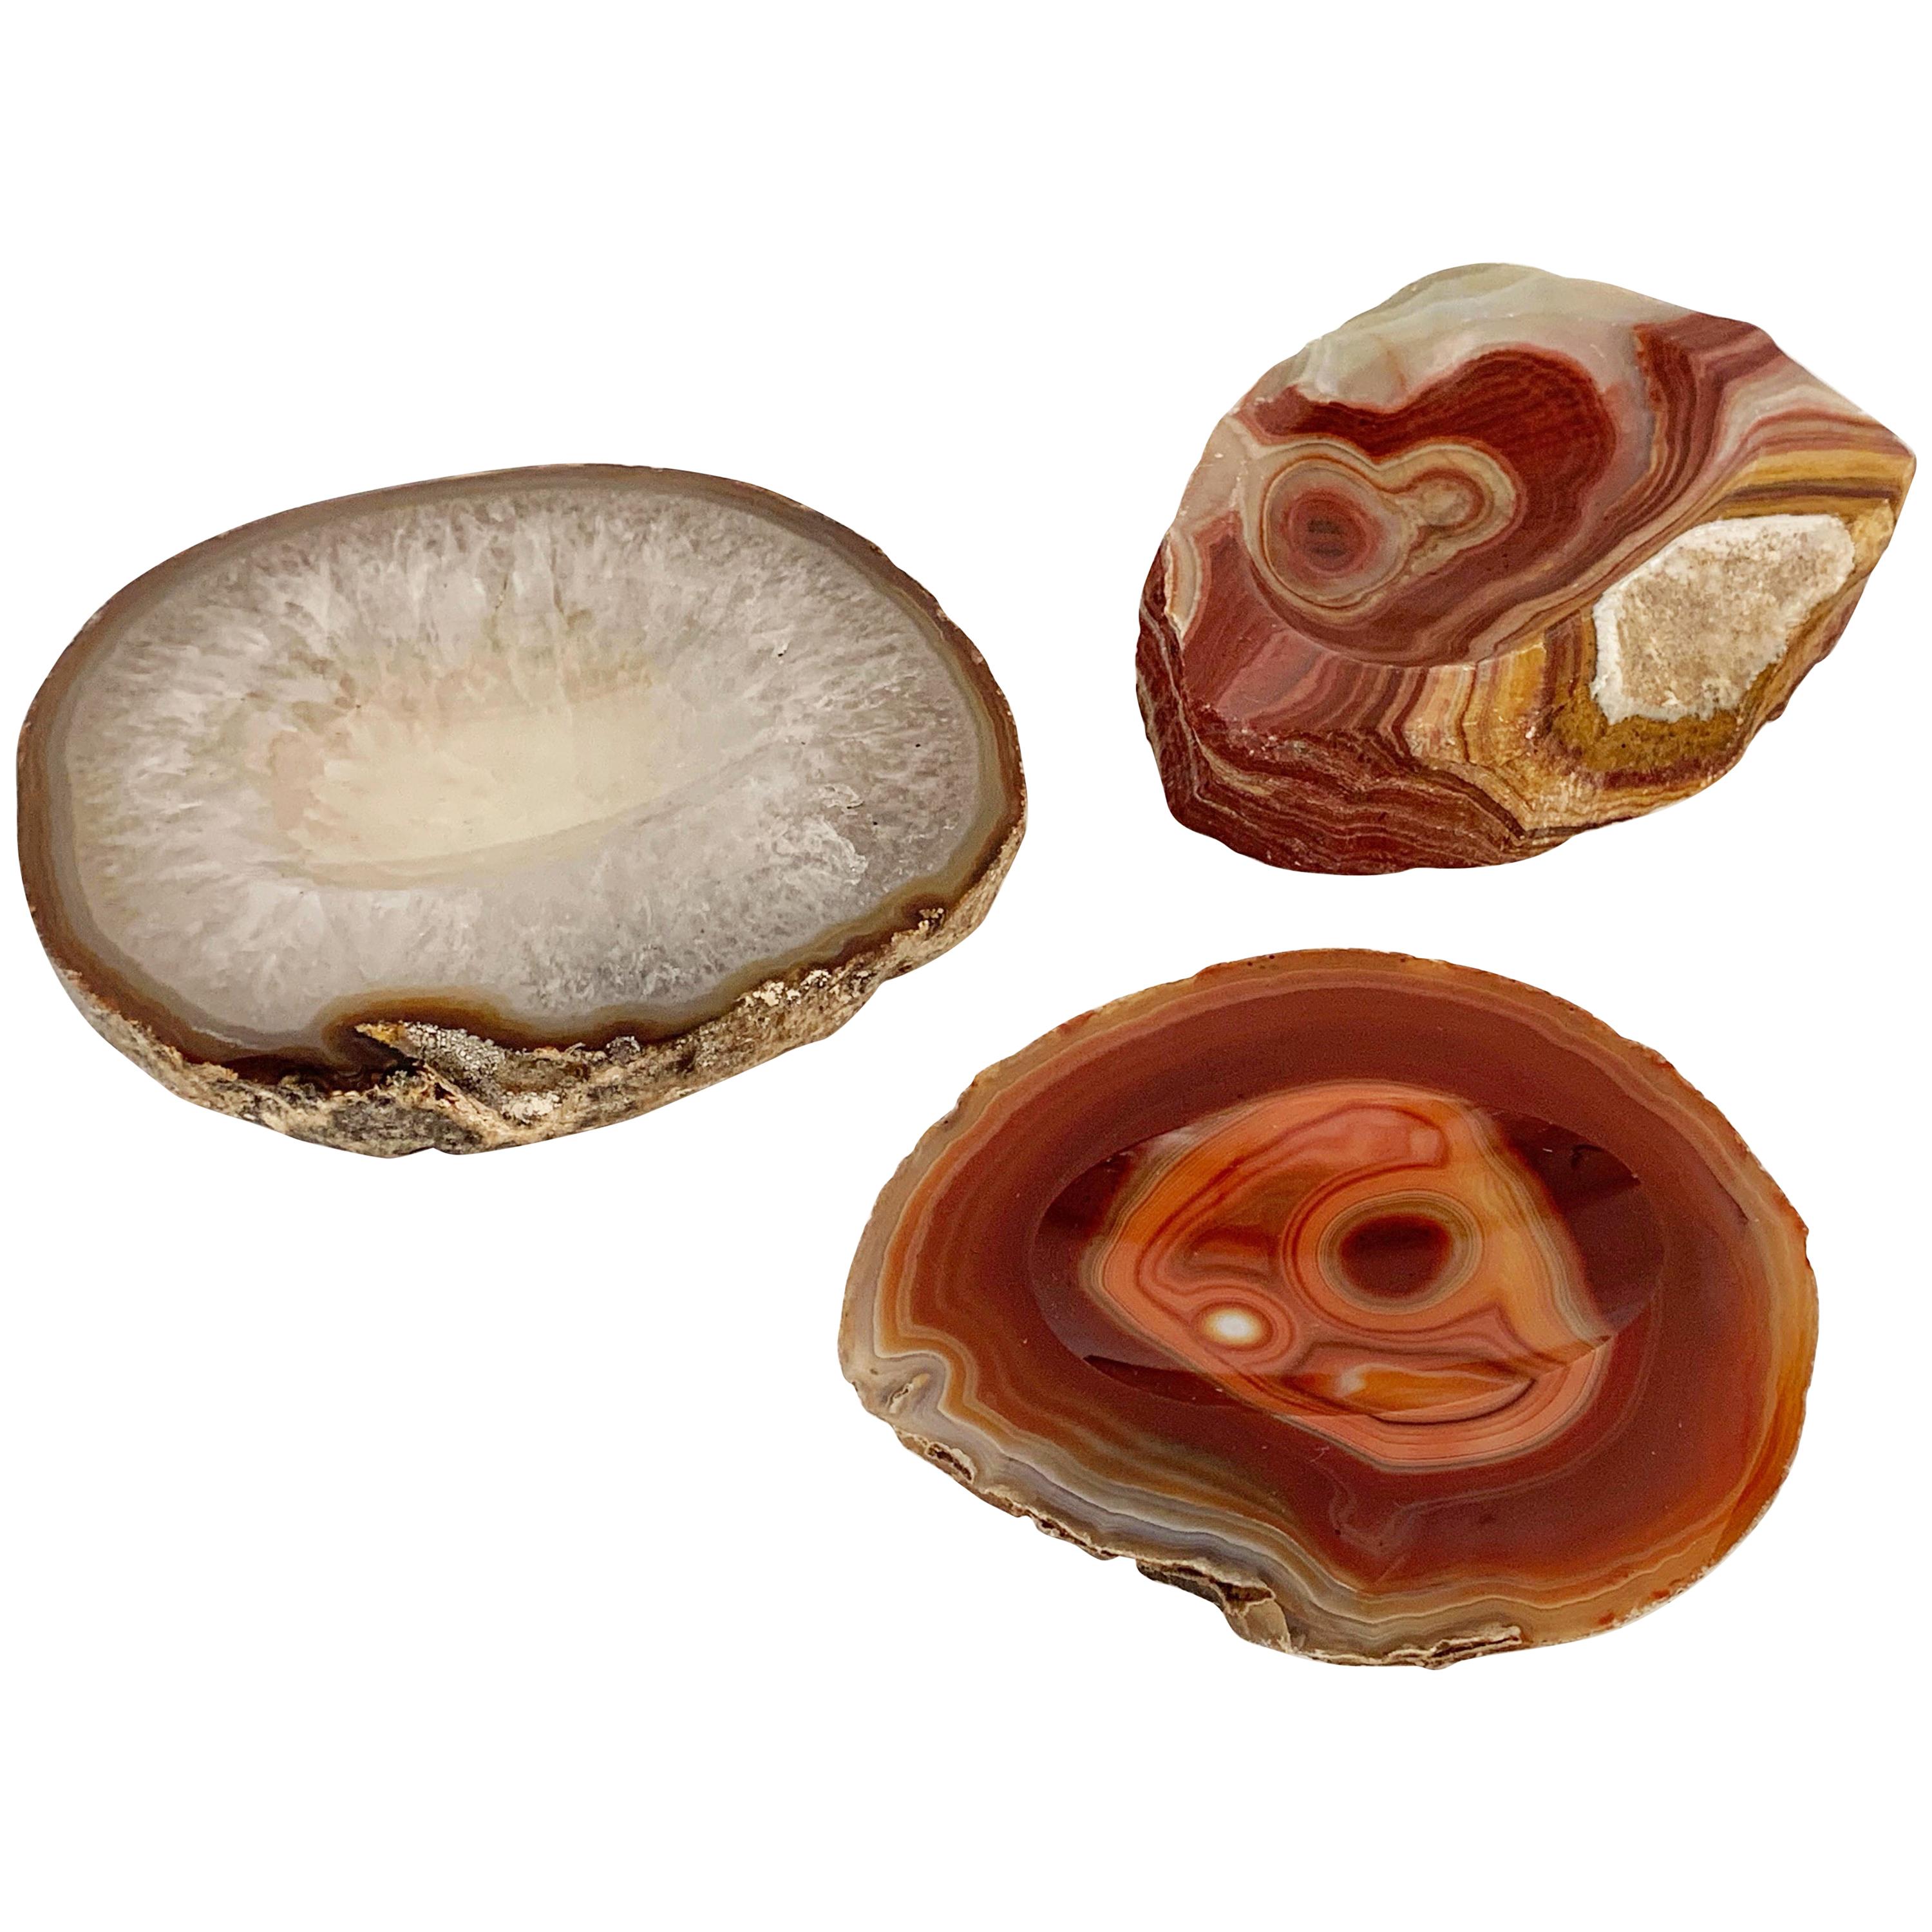 Midcentury White, Organge and Red Onyx, Agate and Quartz Decorative Geode Bowls For Sale